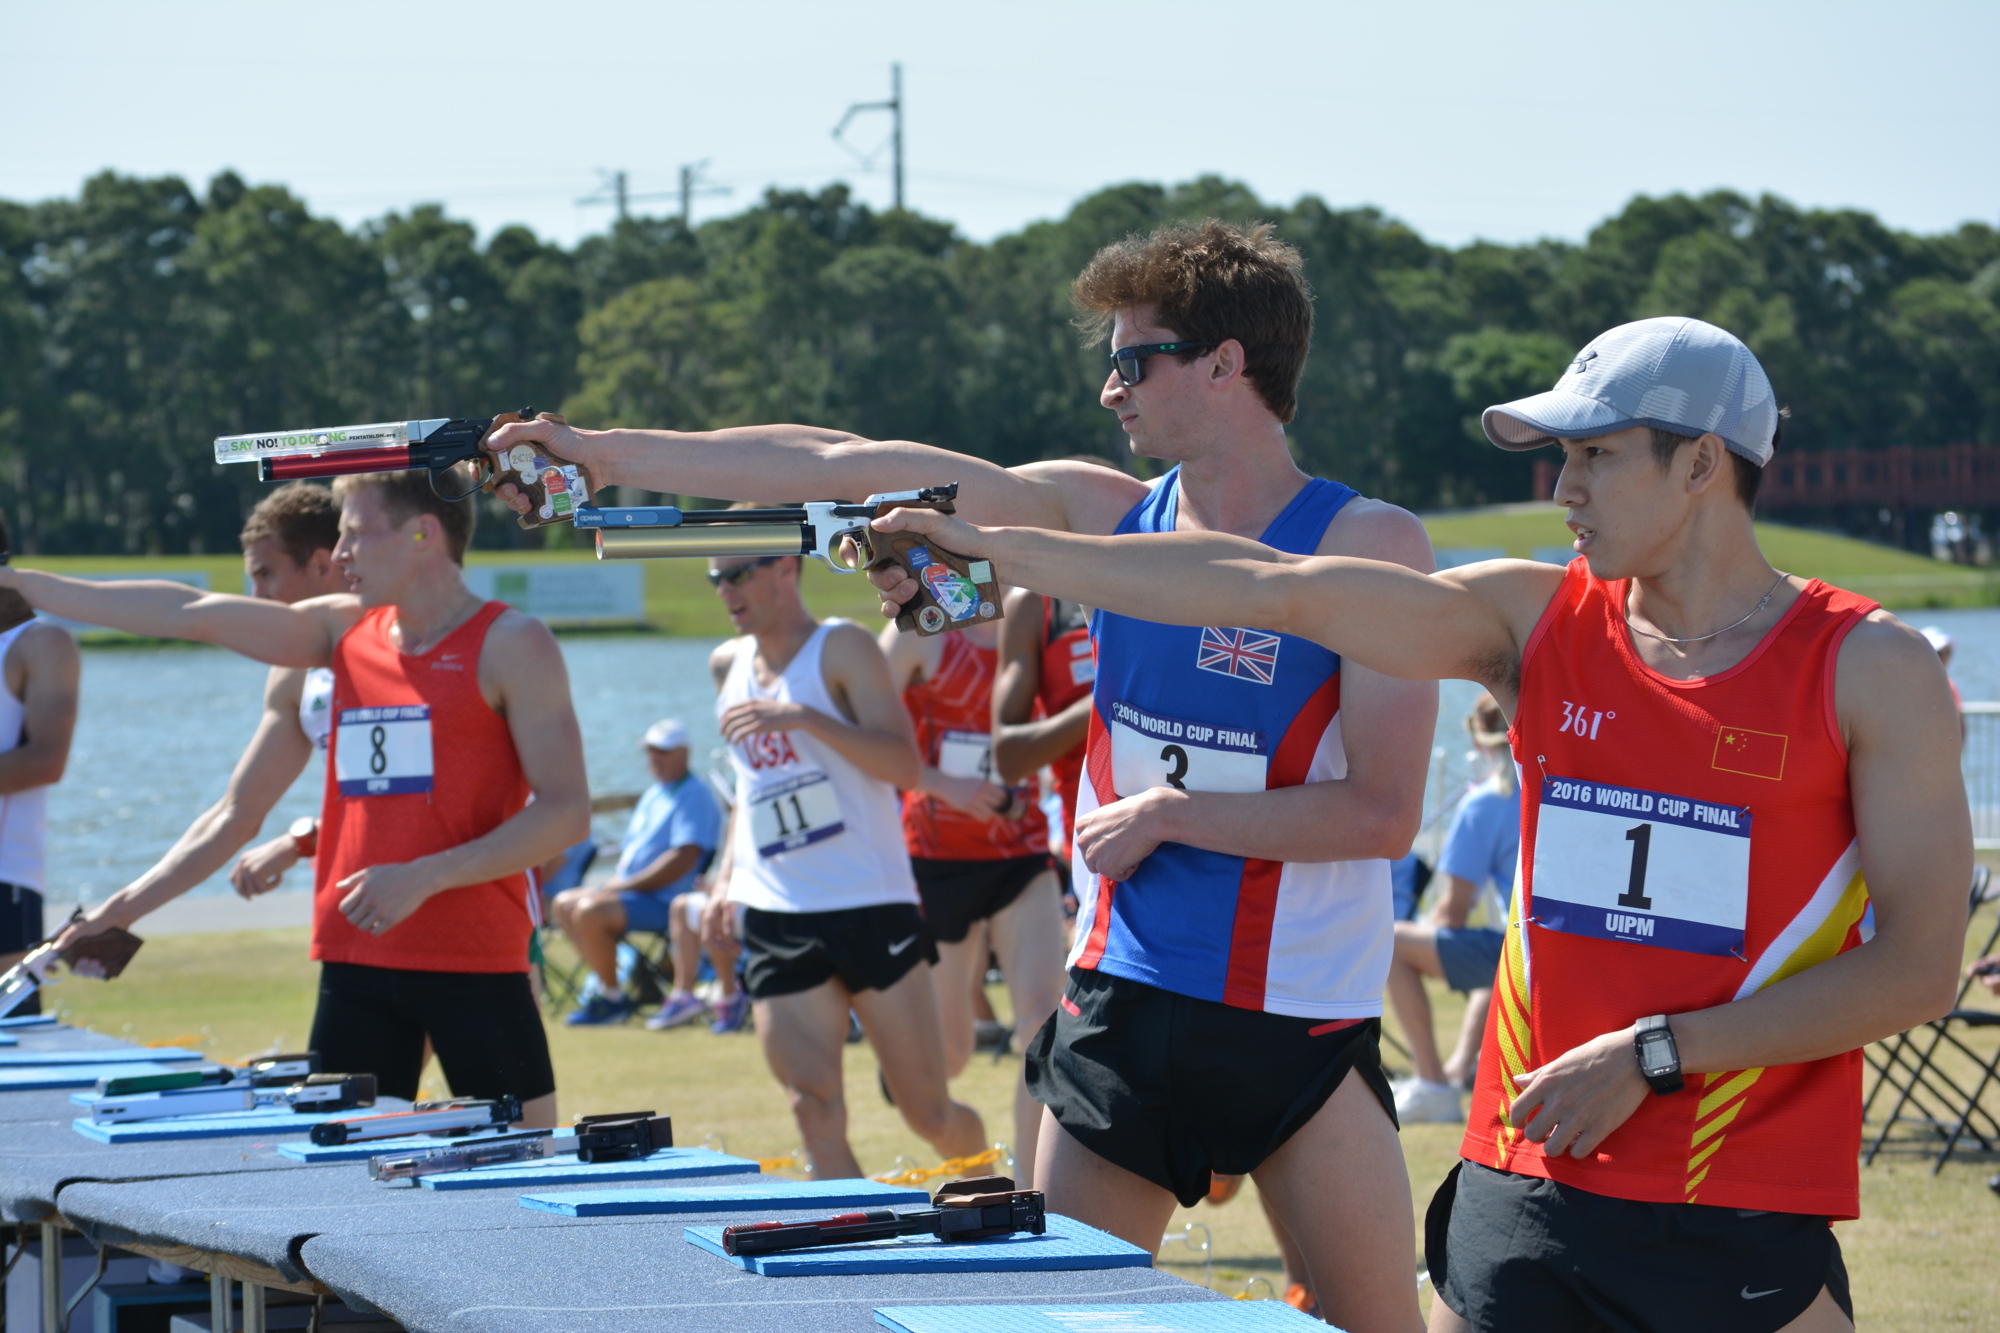 Eventual overall men's champion James Cooke, second from right, grabbed the lead in the pistol shoot/cross-country run from China's Jianli Guo, far right. Guo led the first half of the race but faltered on the shooting range.